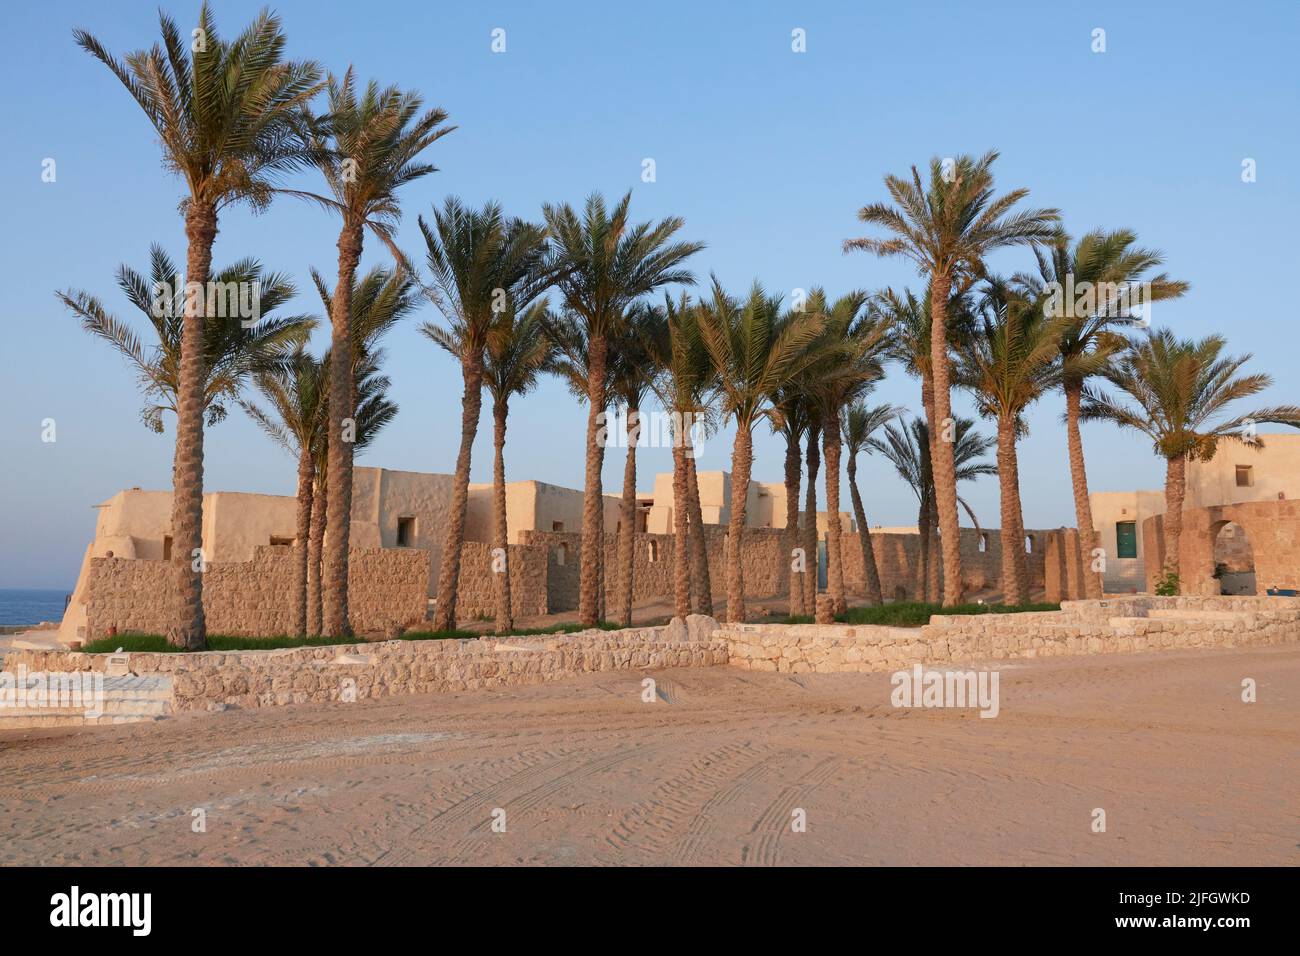 Nubian Style Holiday Resort With Palm Grove, Reminiscent Of An Oasis, On The Red Sea. Marsa Alam, Egypt Stock Photo